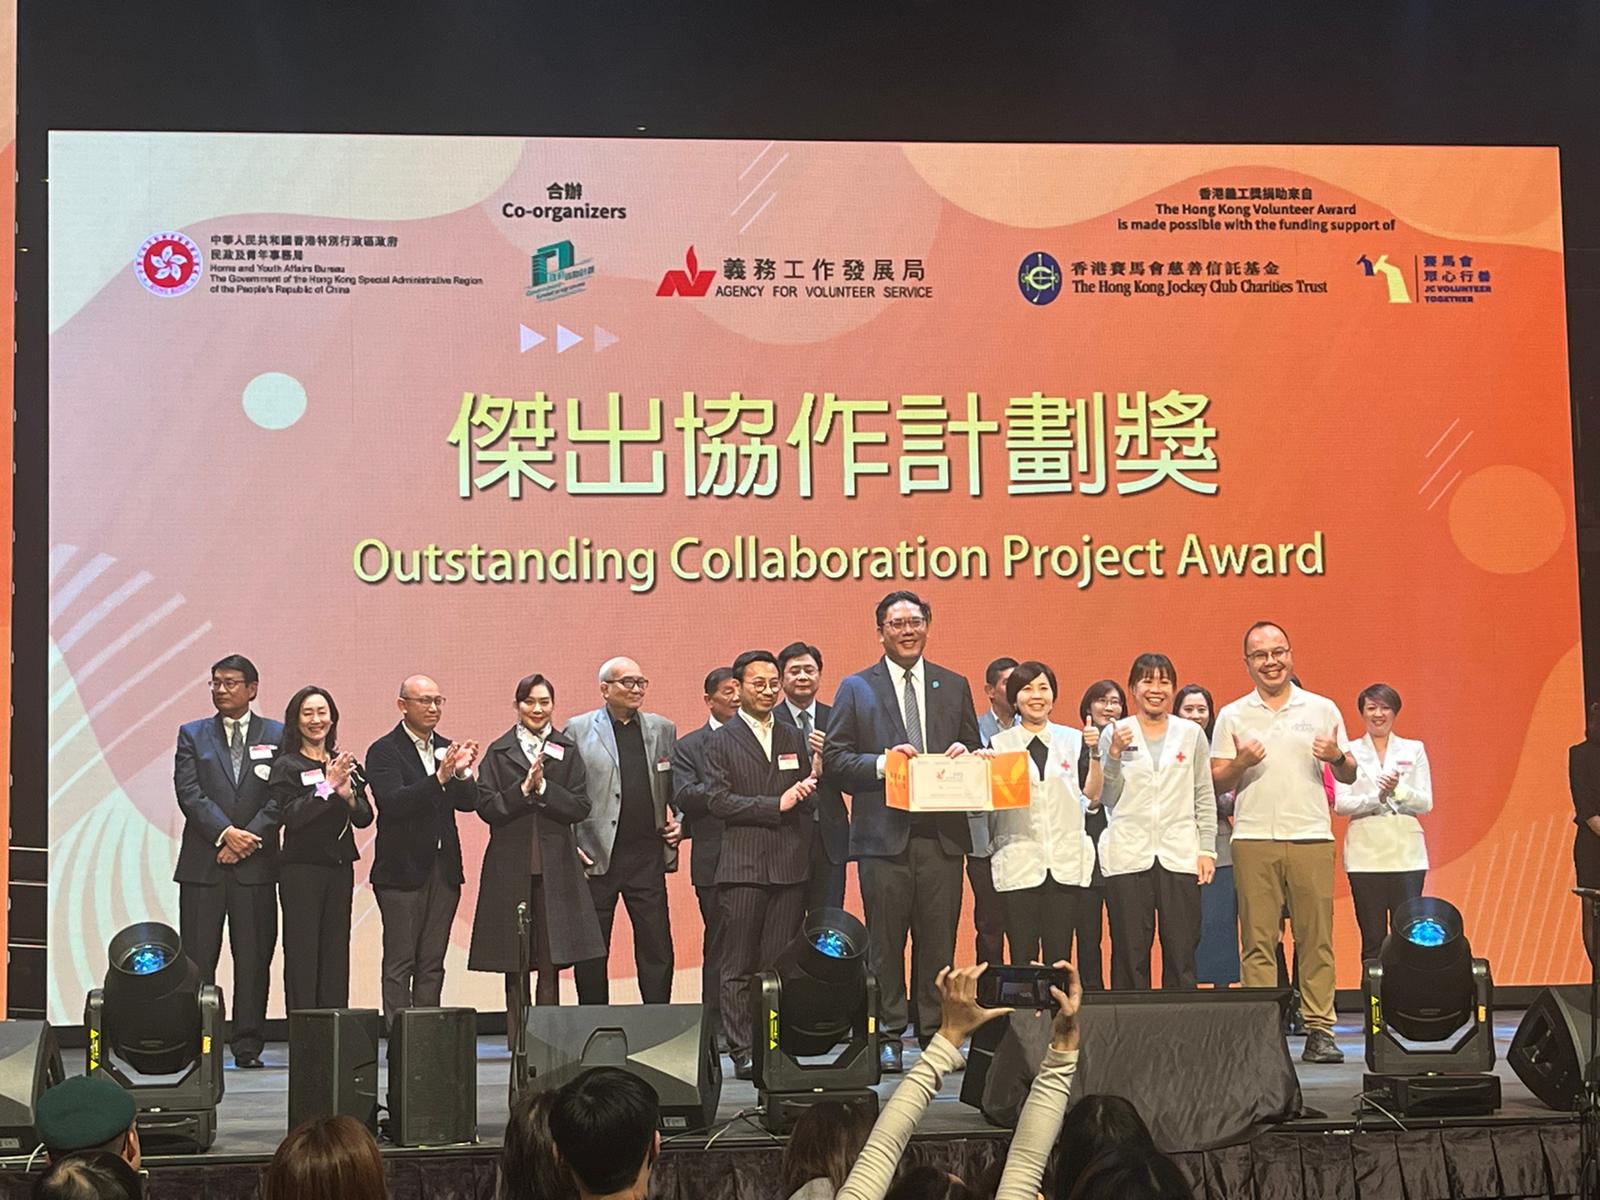 A big group of people, including Hong Kong Red Cross staff, holding an award certificate on stage. A screen in the background says Outstanding Collaboration Project Award.